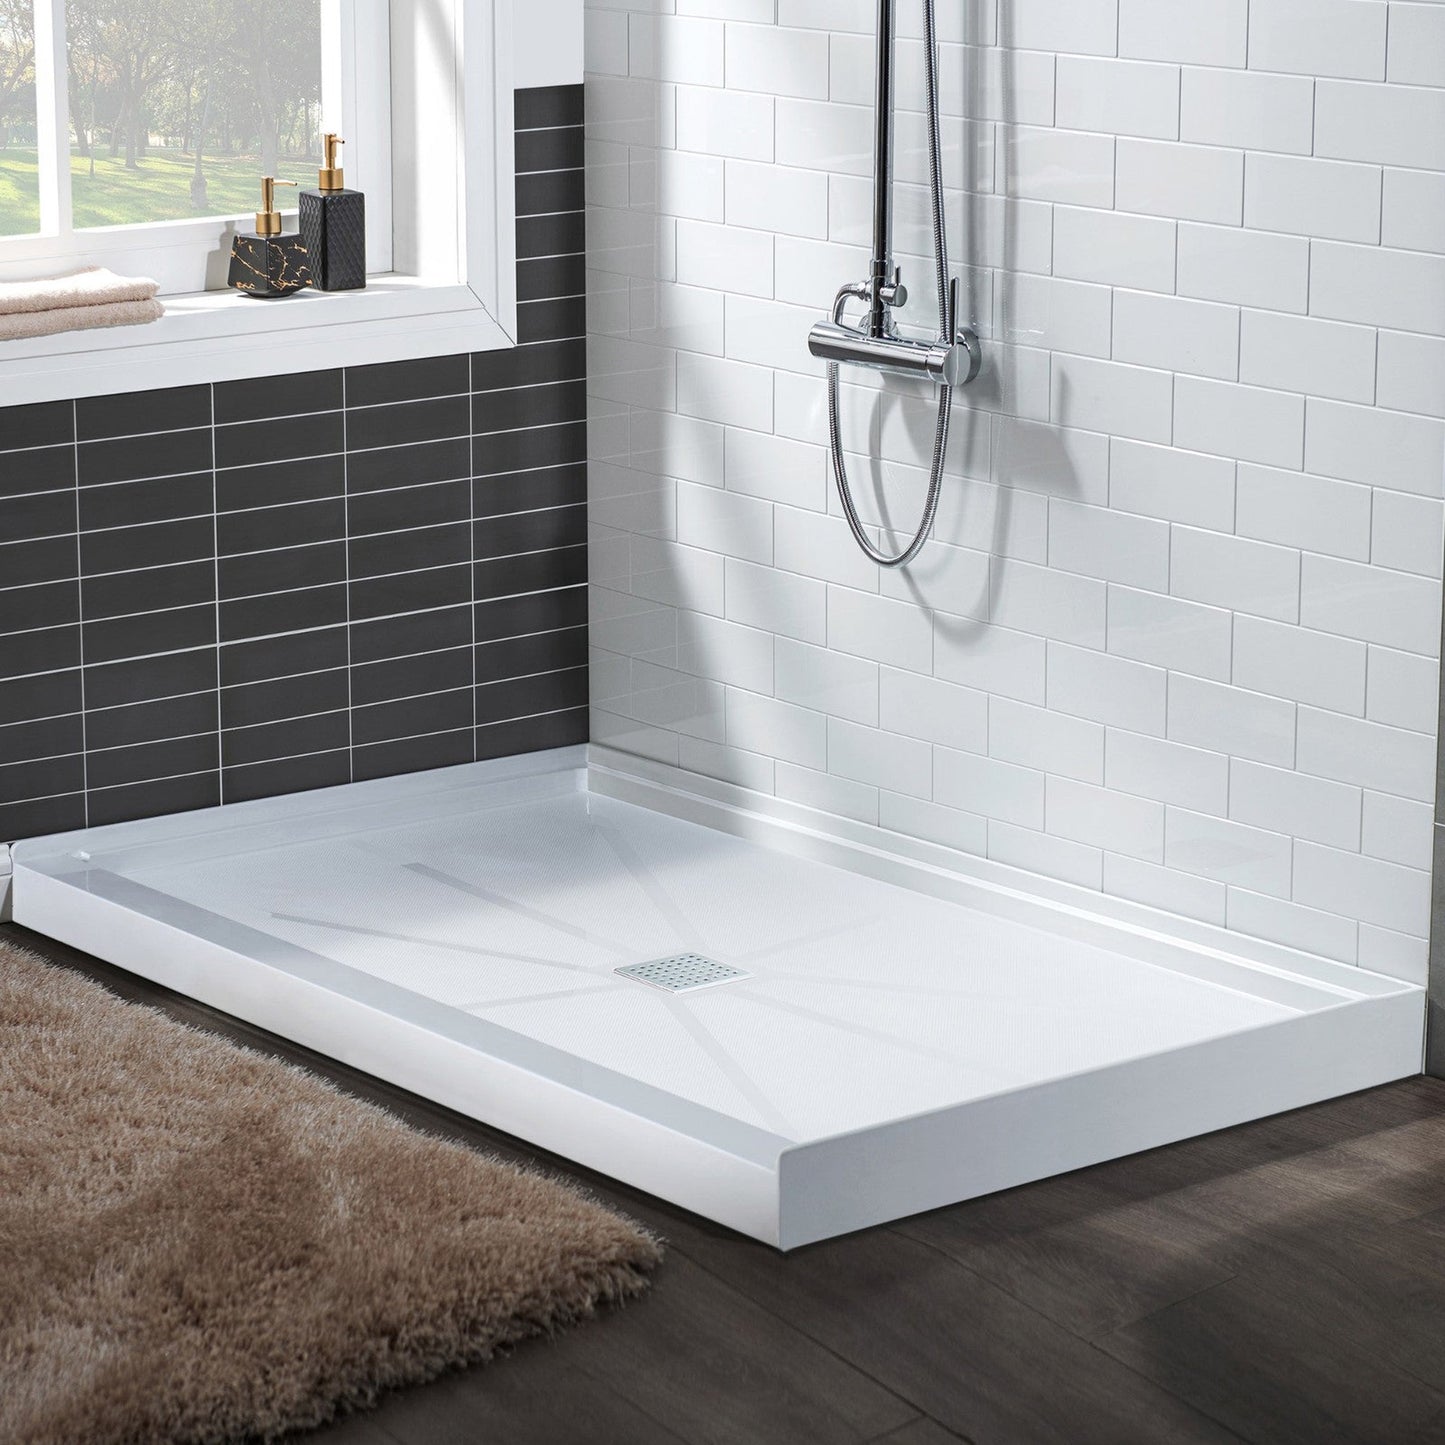 WoodBridge 60" x 30" White Solid Surface Shower Base Center Drain Location With Chrome Trench Drain Cover